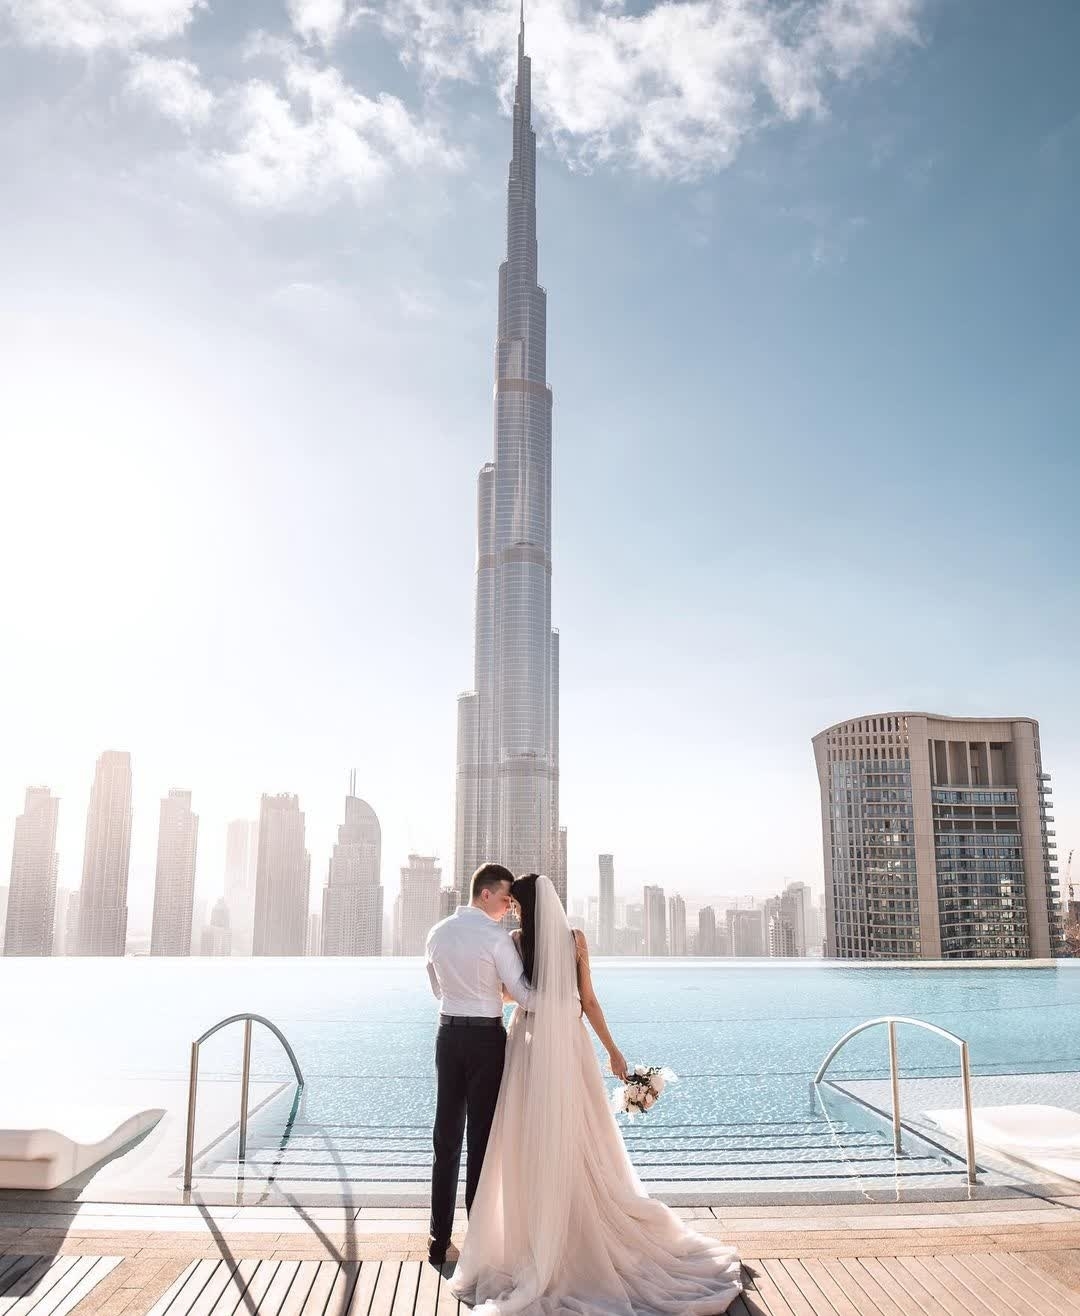 Best places in Dubai for pre wedding photo shoot